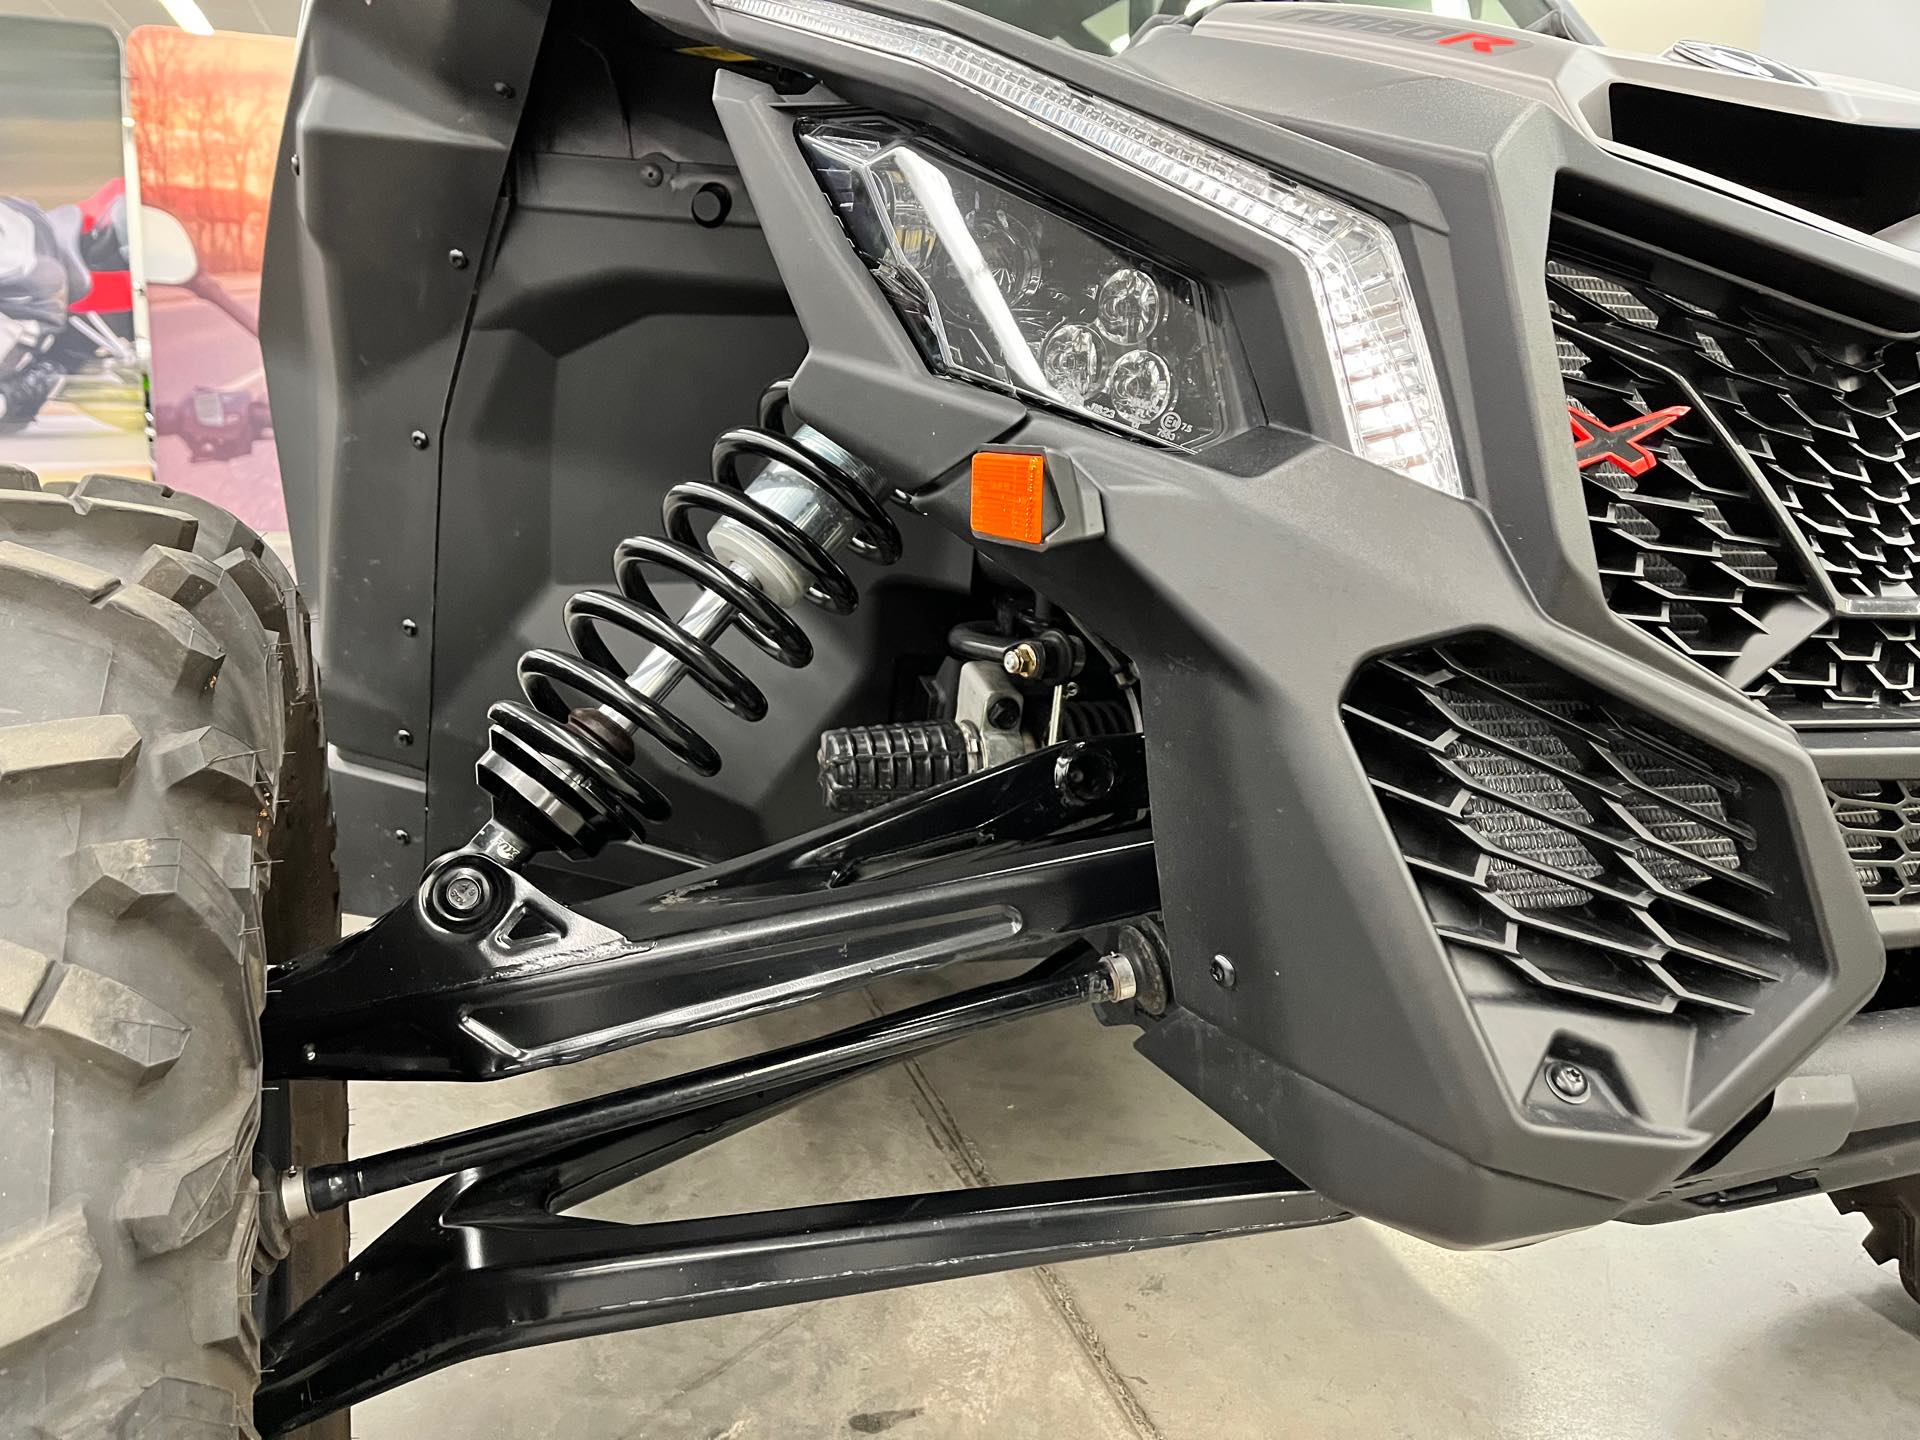 2018 Can-Am Maverick X3 MAX X rs TURBO R at Aces Motorcycles - Denver